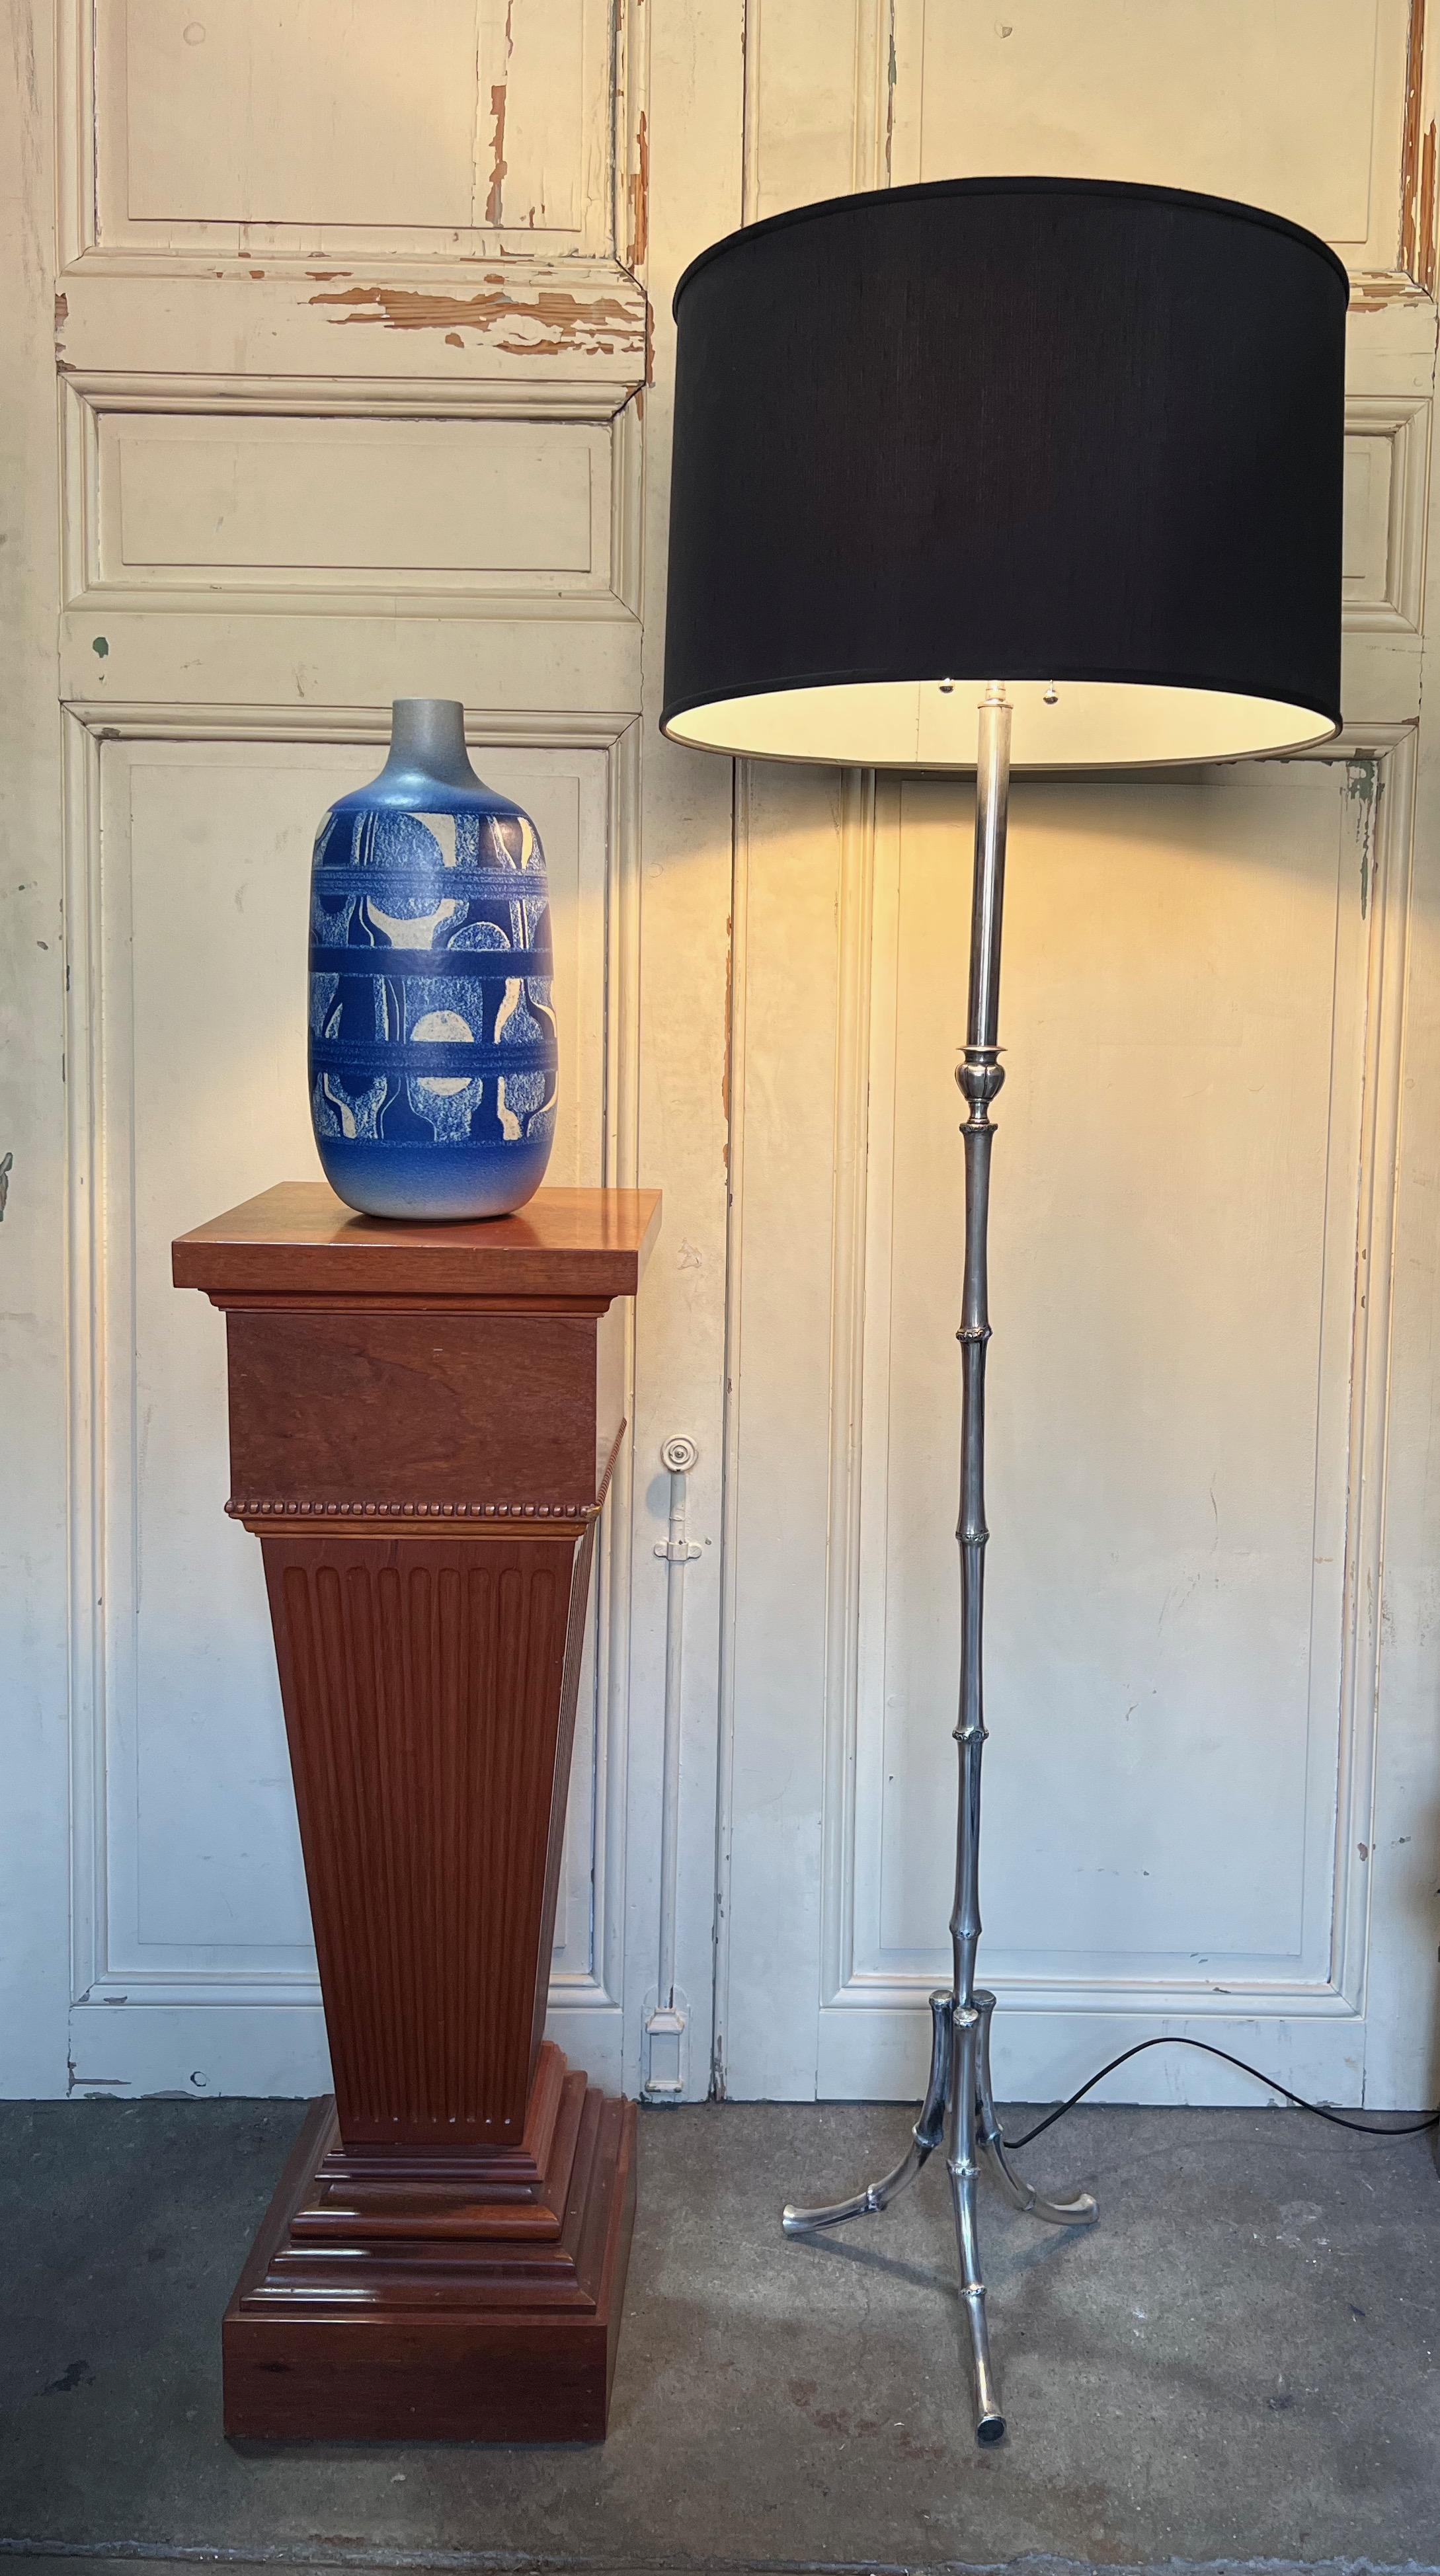 Introducing a stunning French 1950s floor lamp in the Chinese Modern style with a faux bamboo motif. This cast brass floor lamp has been hand polished to reveal a soft silver sheen, highlighting its vintage qualities. The tripod base provides sturdy